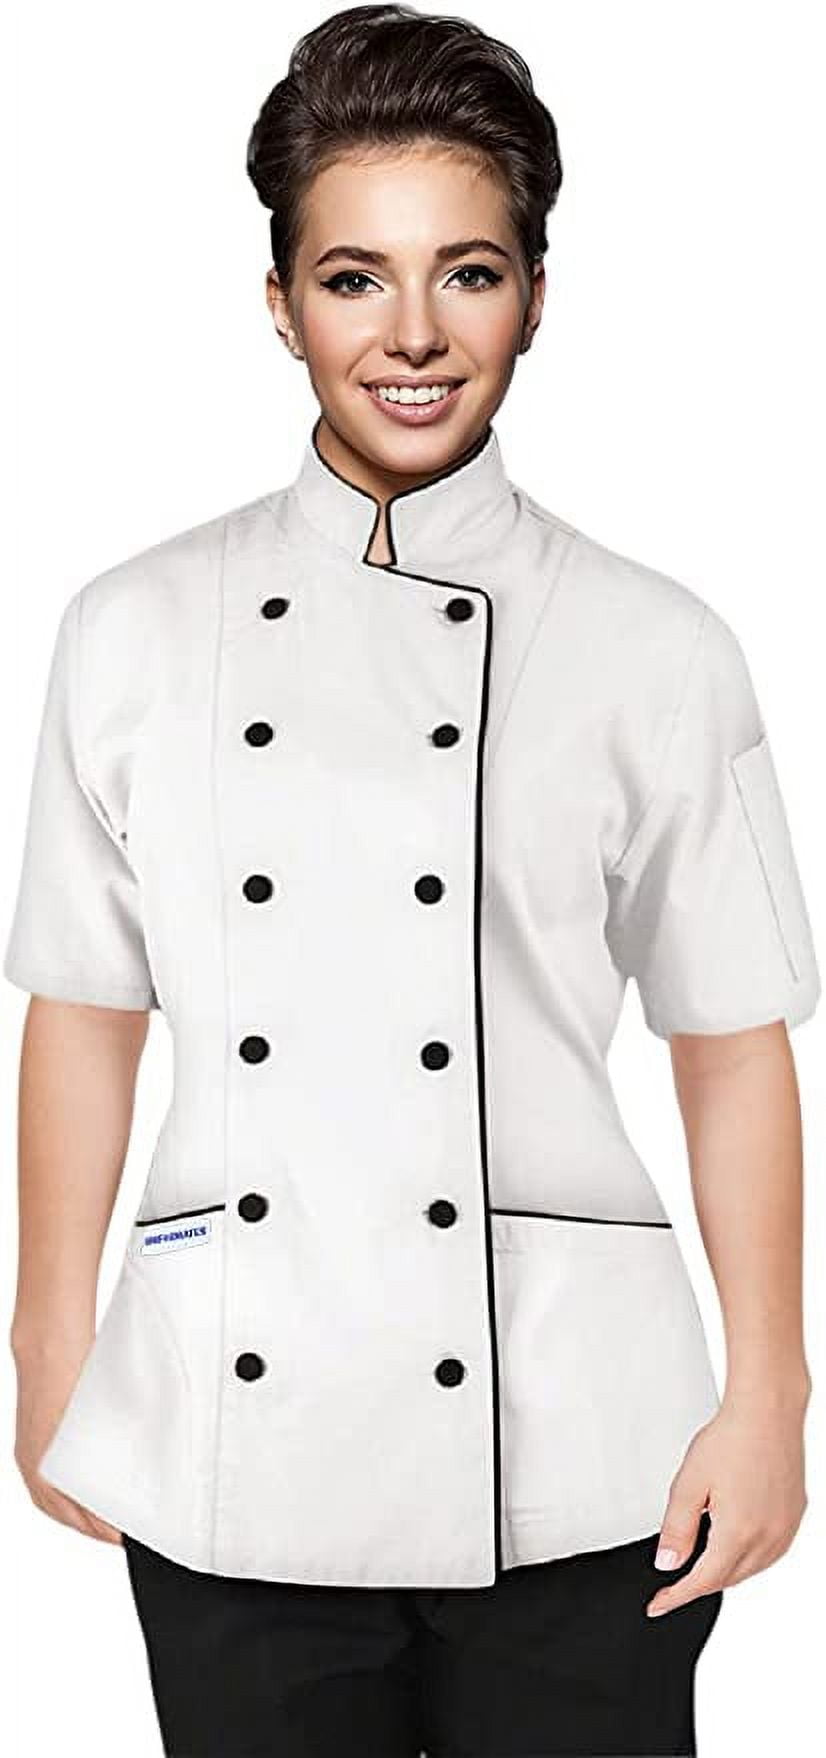 Elite Kitchens Apparel Professional Chef Shirts Bulk 12 Pack, White  Short-Sleeved with Snap Buttons and Thermometer Pocket for Restaurant or  Home Kitchen - Yahoo Shopping